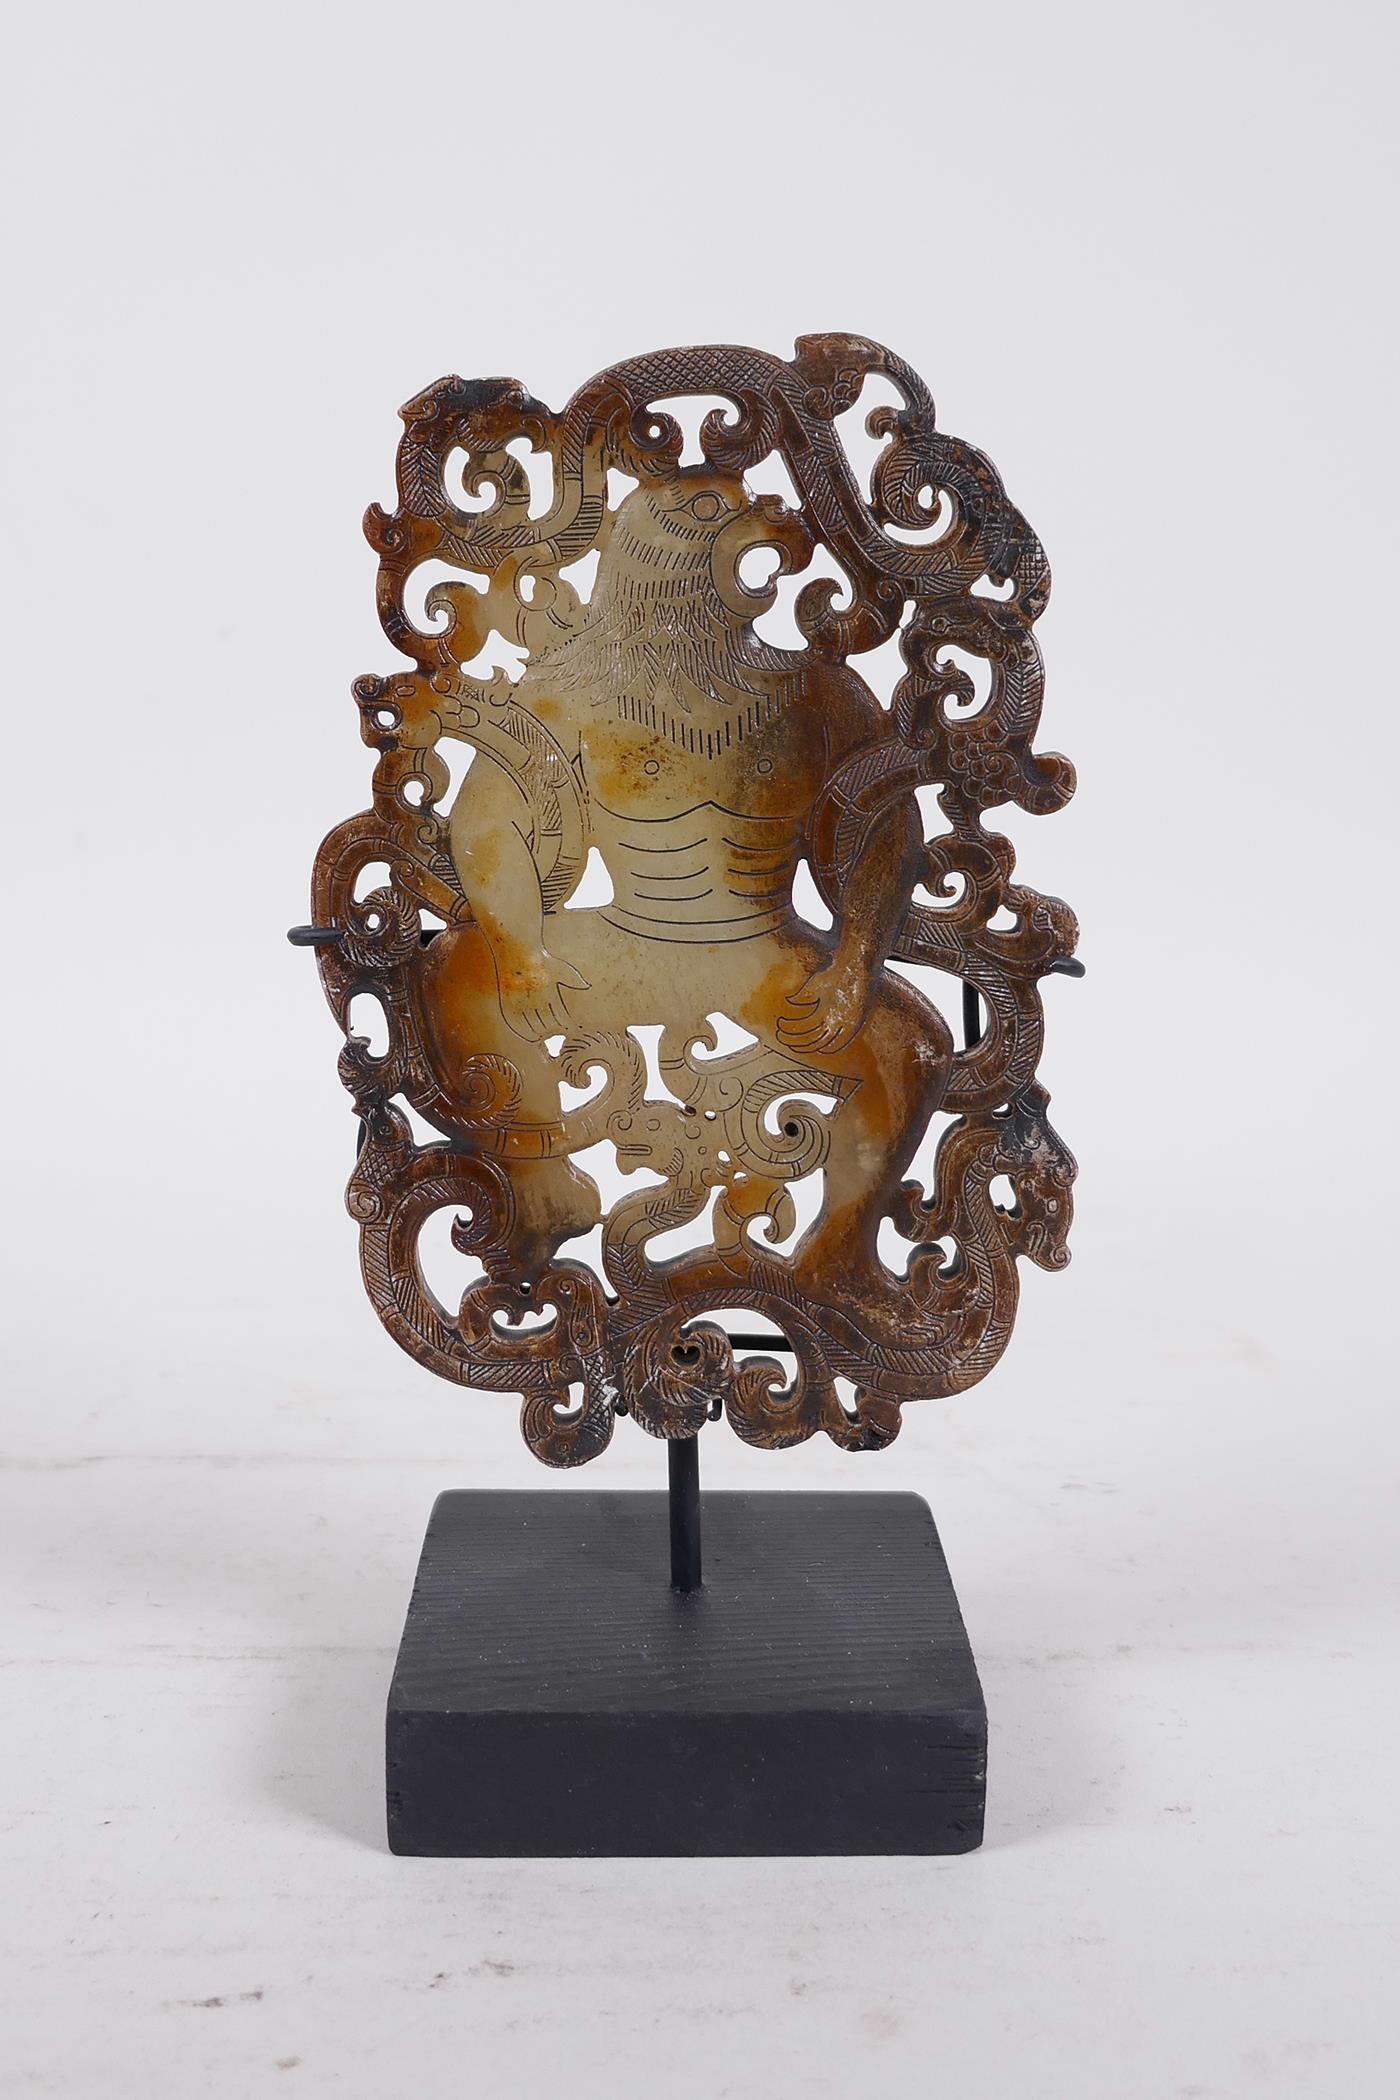 A Chinese pierced jade ornament, carved in the form of a bird headed man entwined with dragons, on a